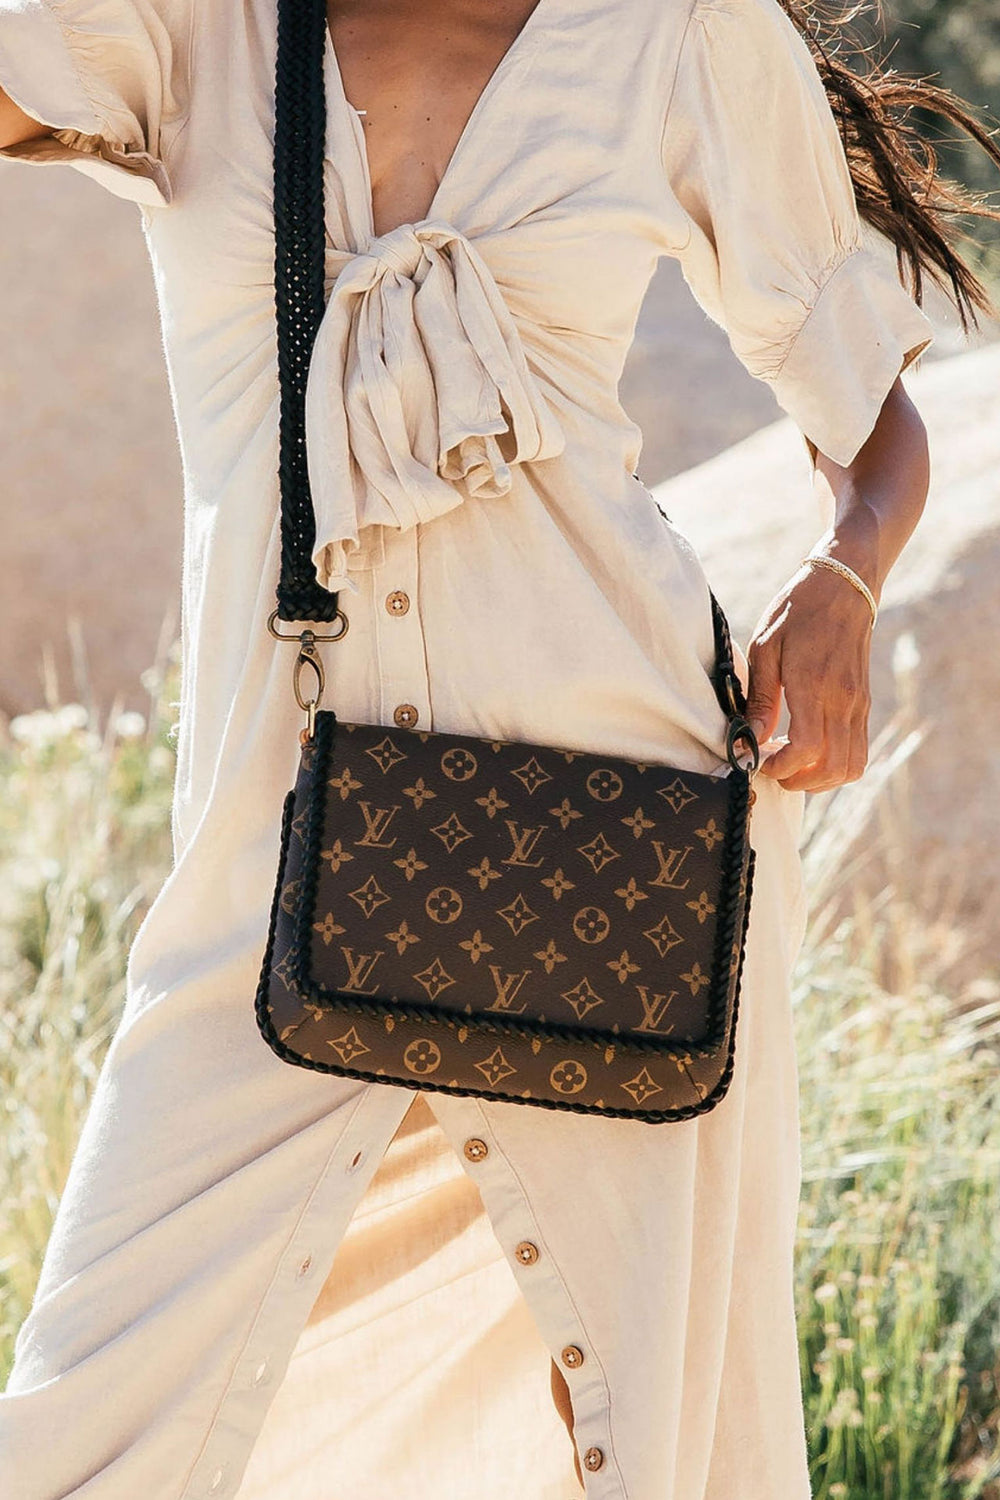 Louis Vuitton Pochette Felicie, 5 ways to style and wear